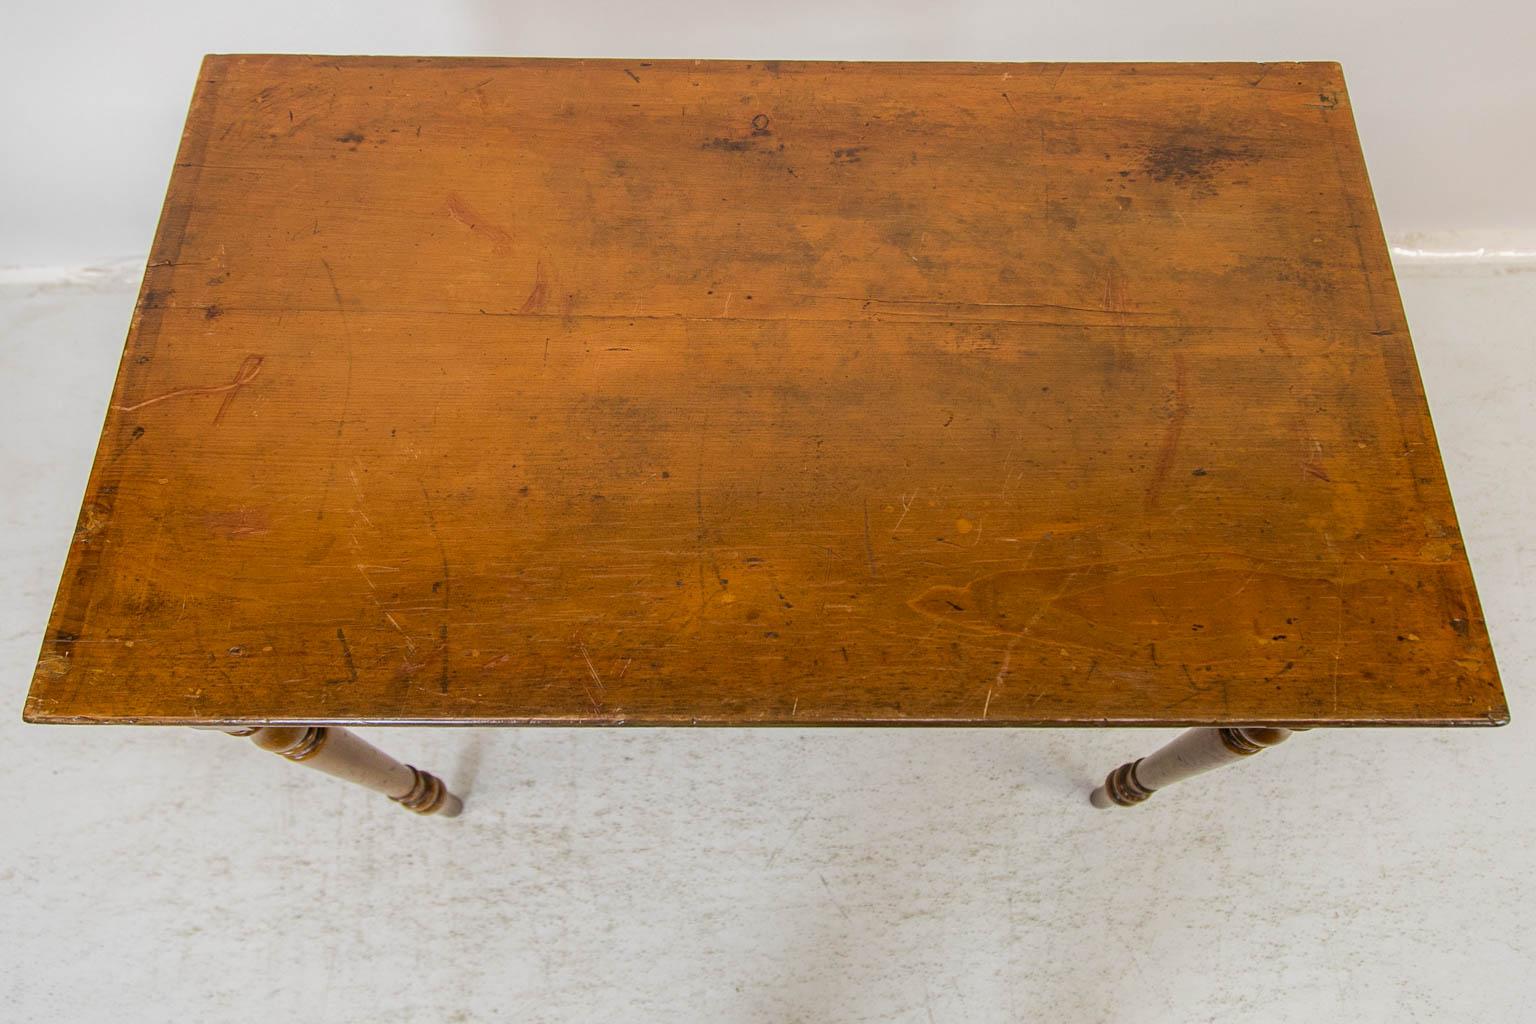 The base of this side table is painted to simulate wood and red line inlay. The top has some spotting commensurate with use and age. The back and side edges of the top have a ghost mark from a gallery that was removed at some point. The hardware is